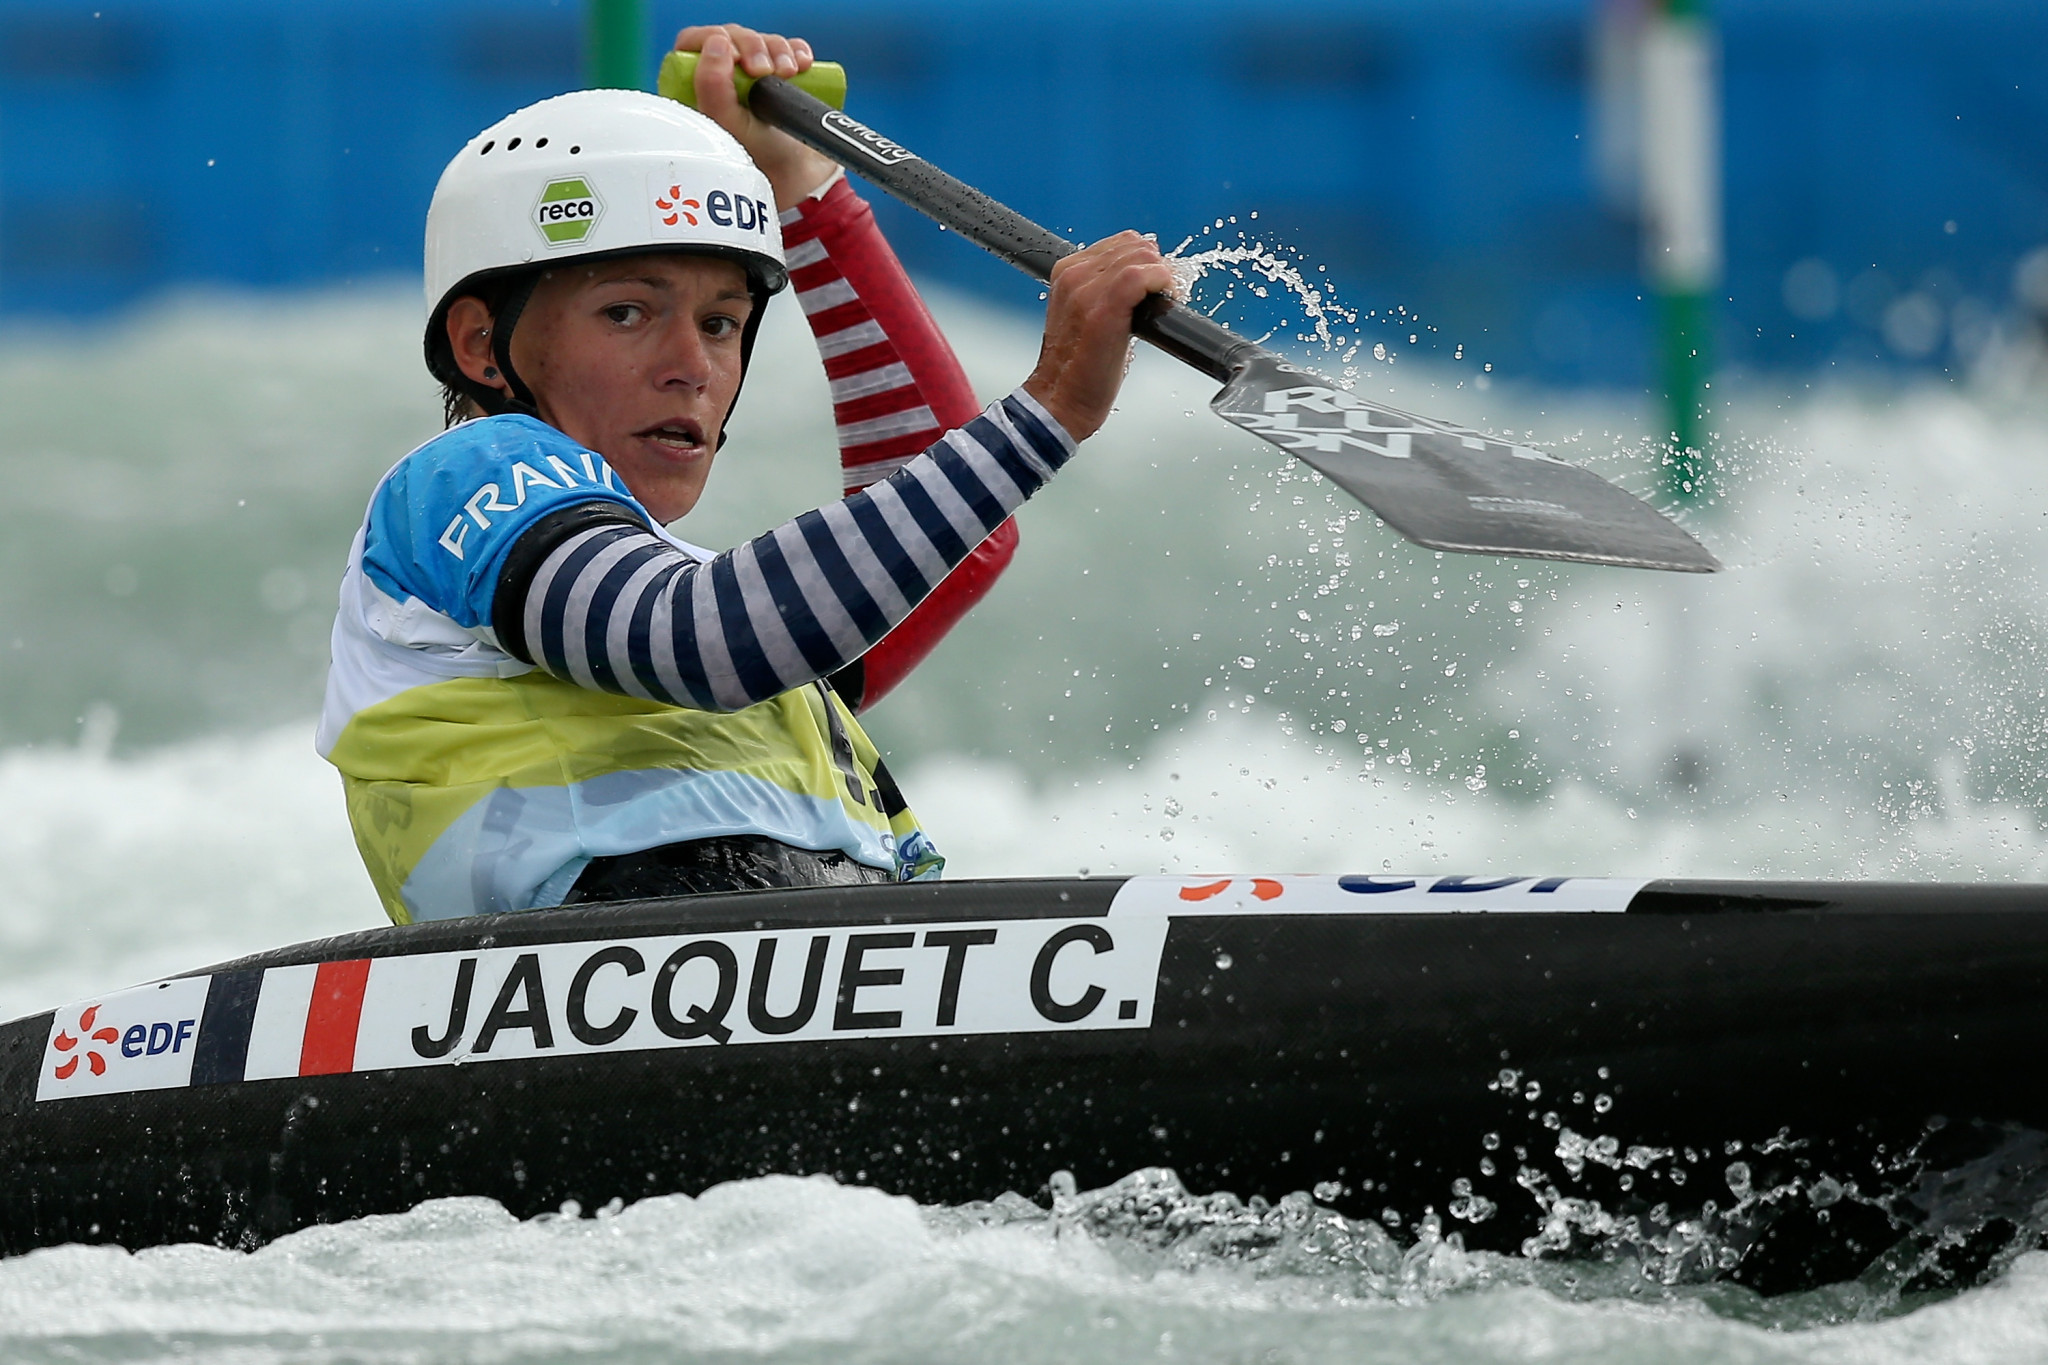 France's Claire Jacquet won the women's C1 at the ICF Canoe Slalom World Cup event in Bratislava ©Getty Images